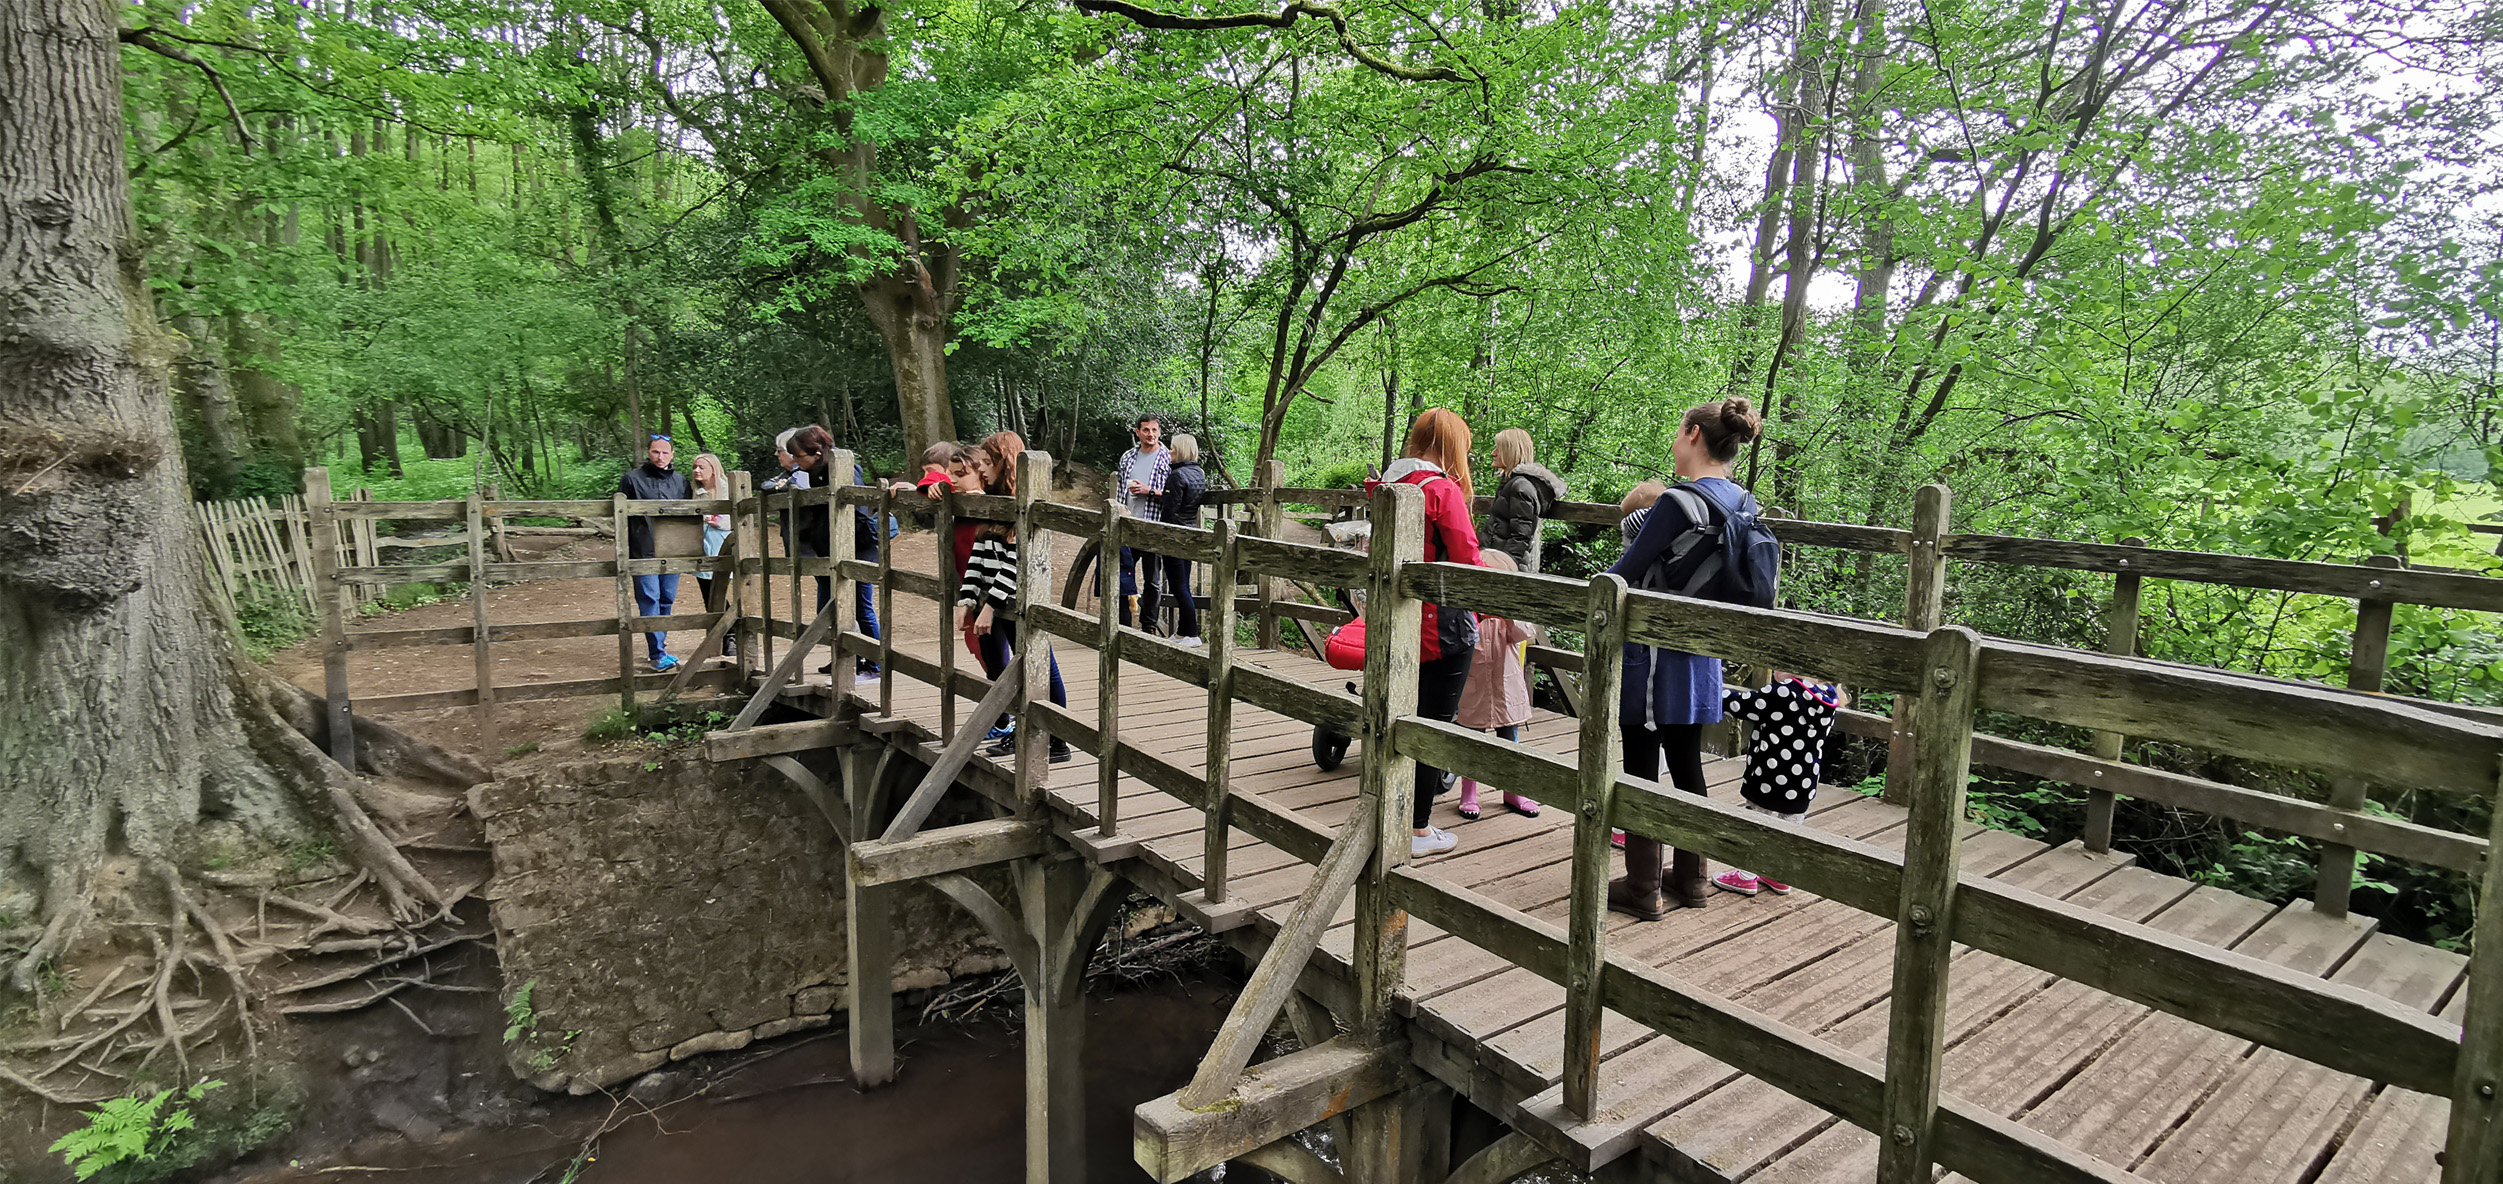 Pooh Sticks – Hartfield and The Hundred Acre Wood | Coddiwompleexpress